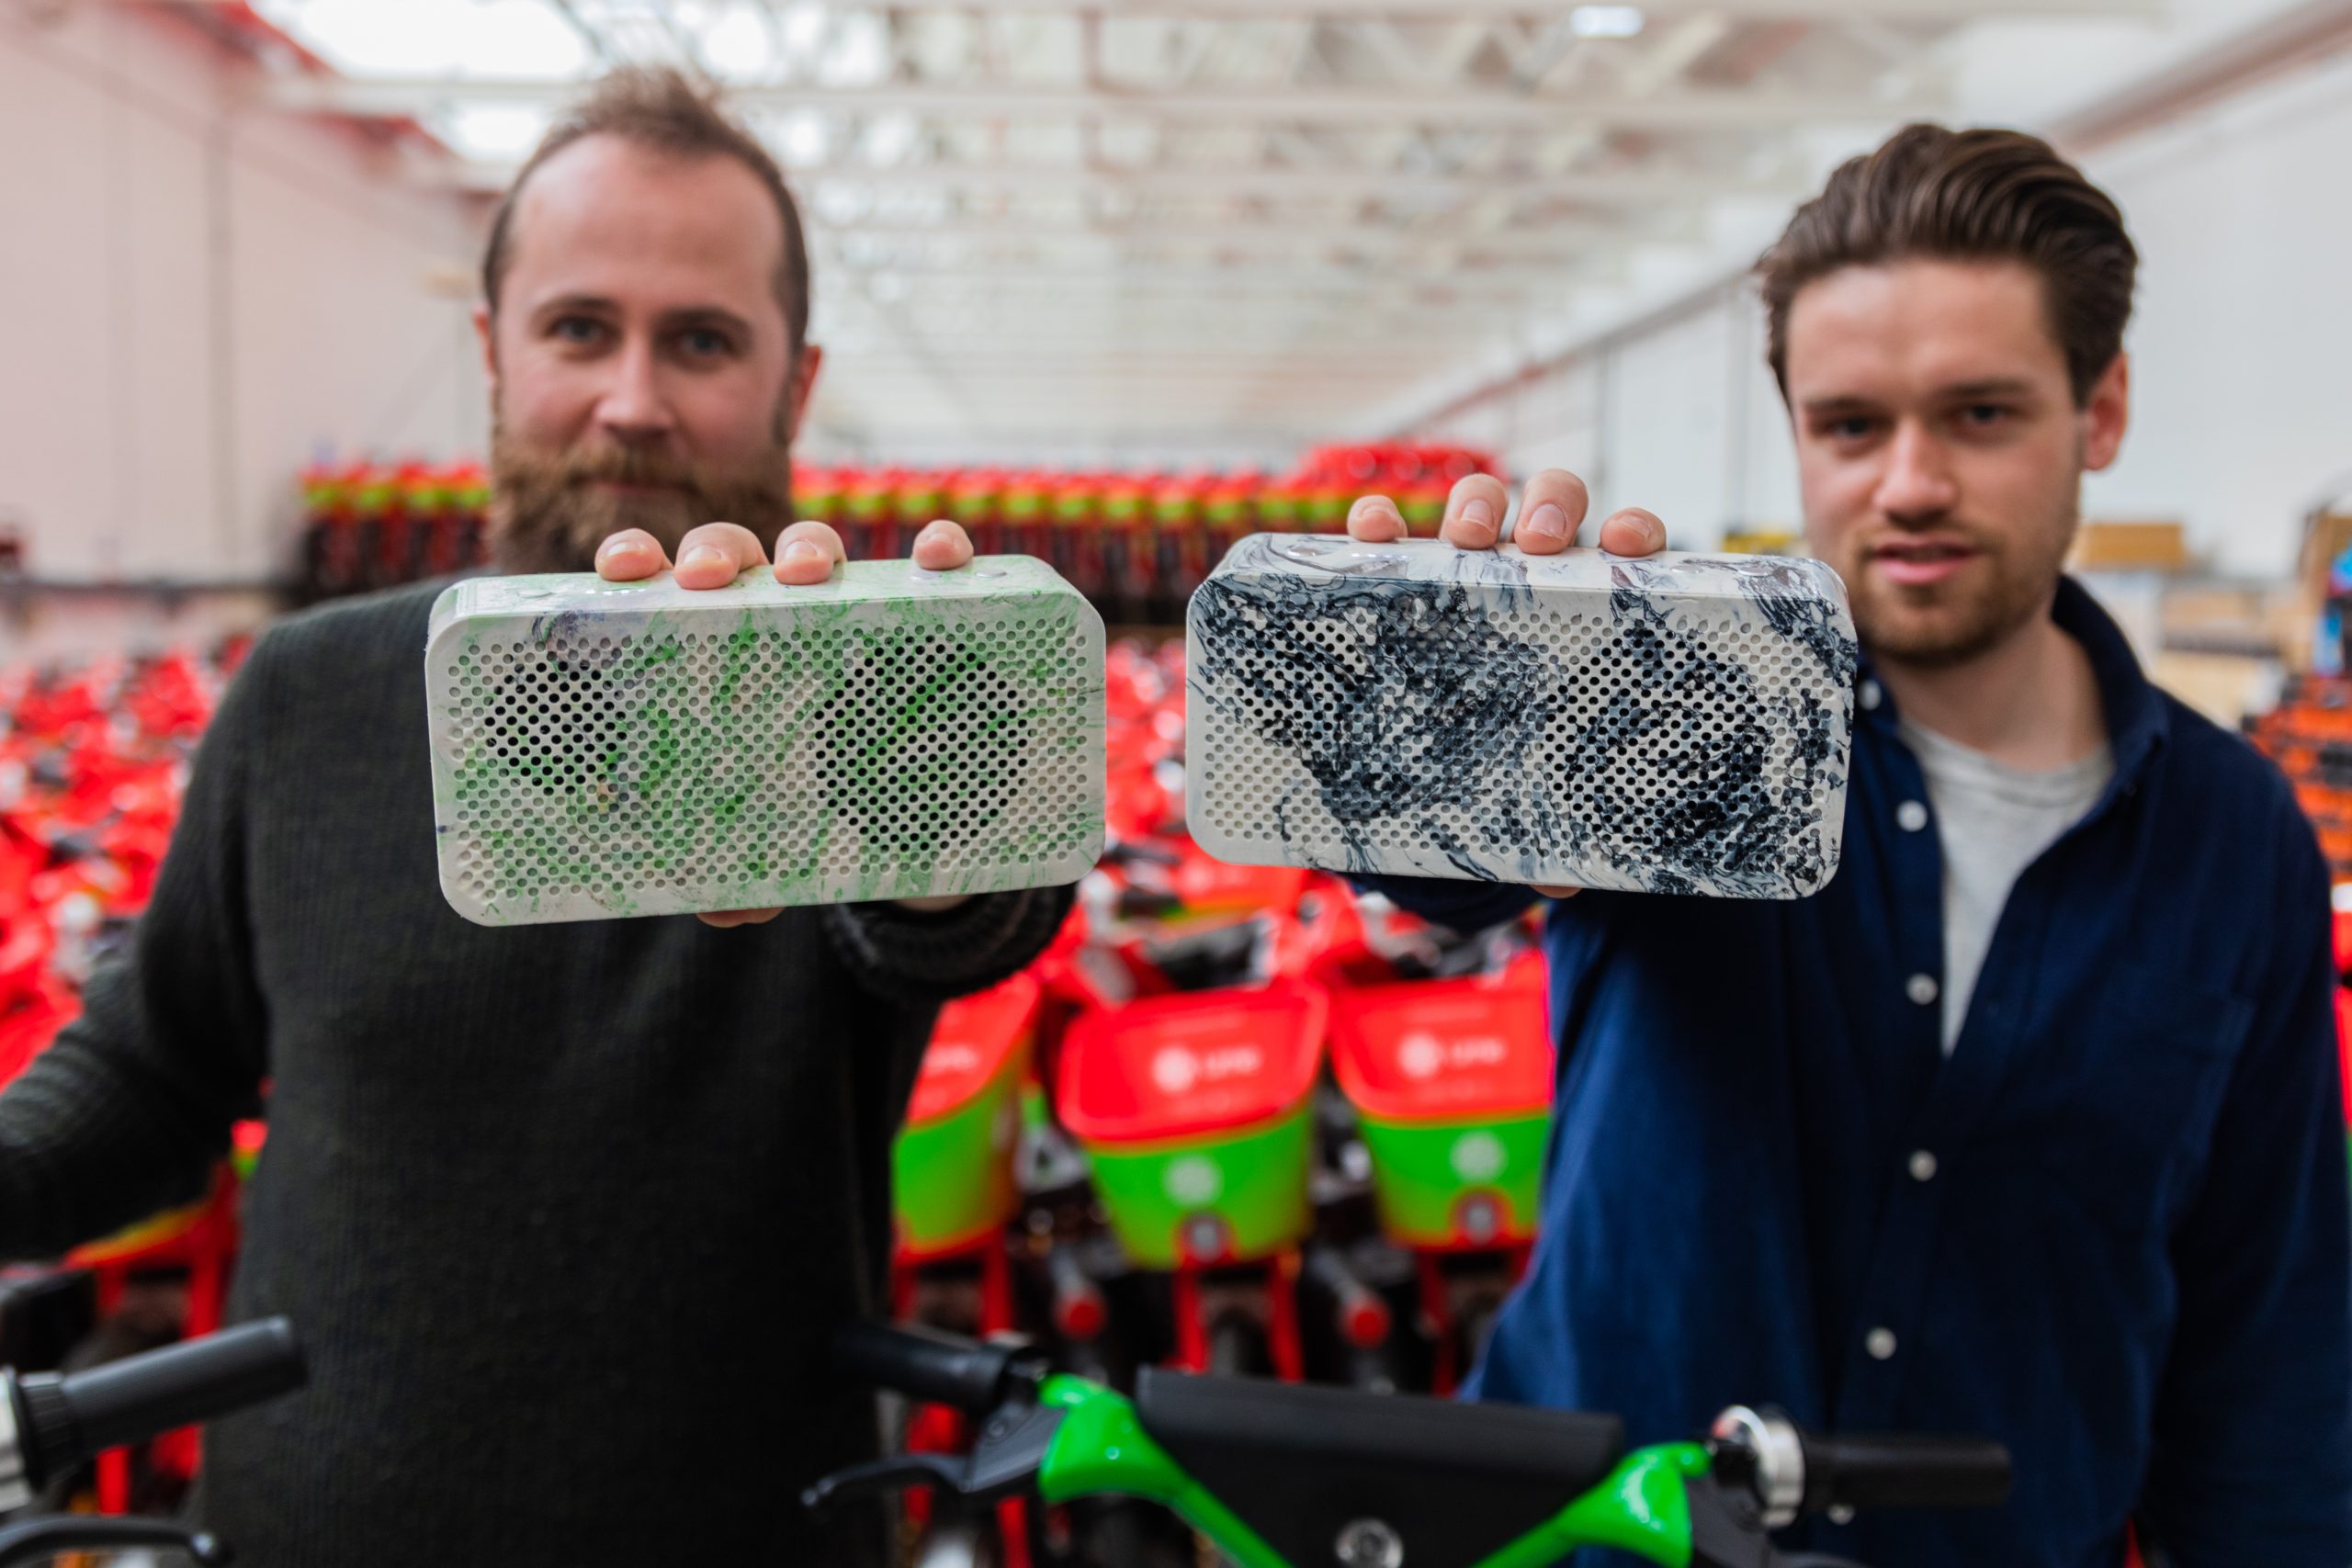 Gomi Speakers are made from plastic bags and powered by repurposed Lime e-bike batteries